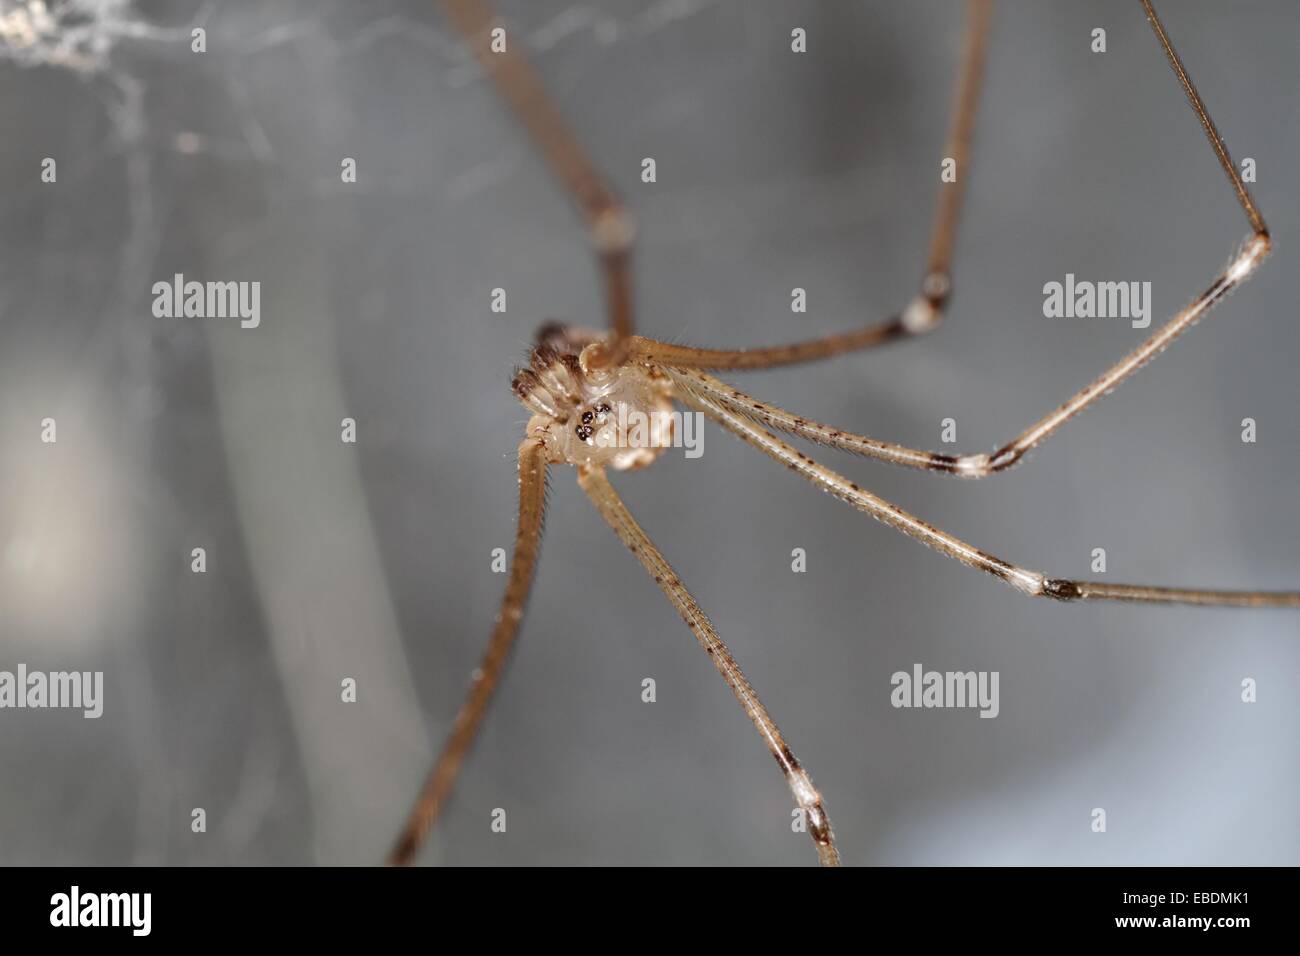 Pholcus phalangioides spider, Spain. Stock Photo